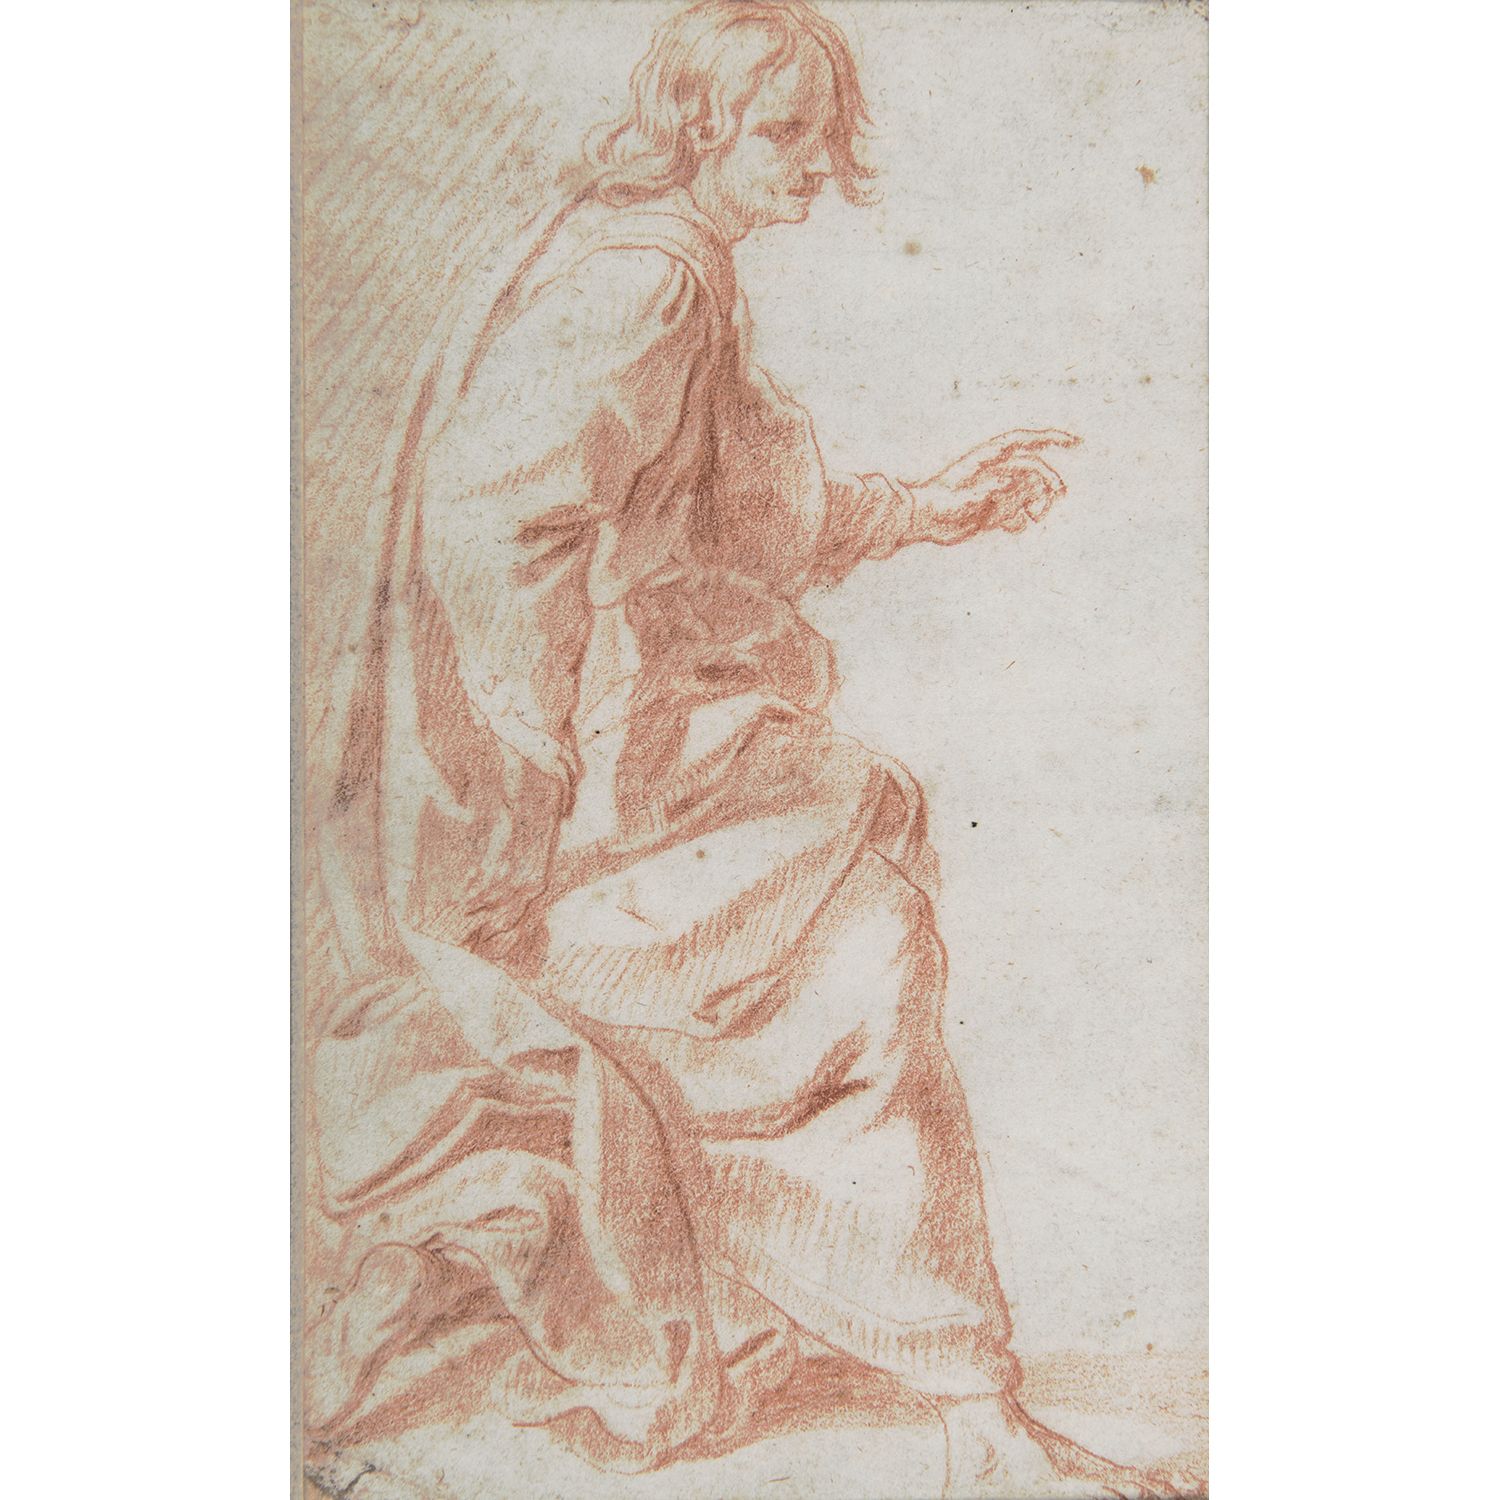 Null FLORENTINE SCHOOL OF THE 17TH CENTURY

STUDY OF A DRAPED MAN

Sanguine

One&hellip;